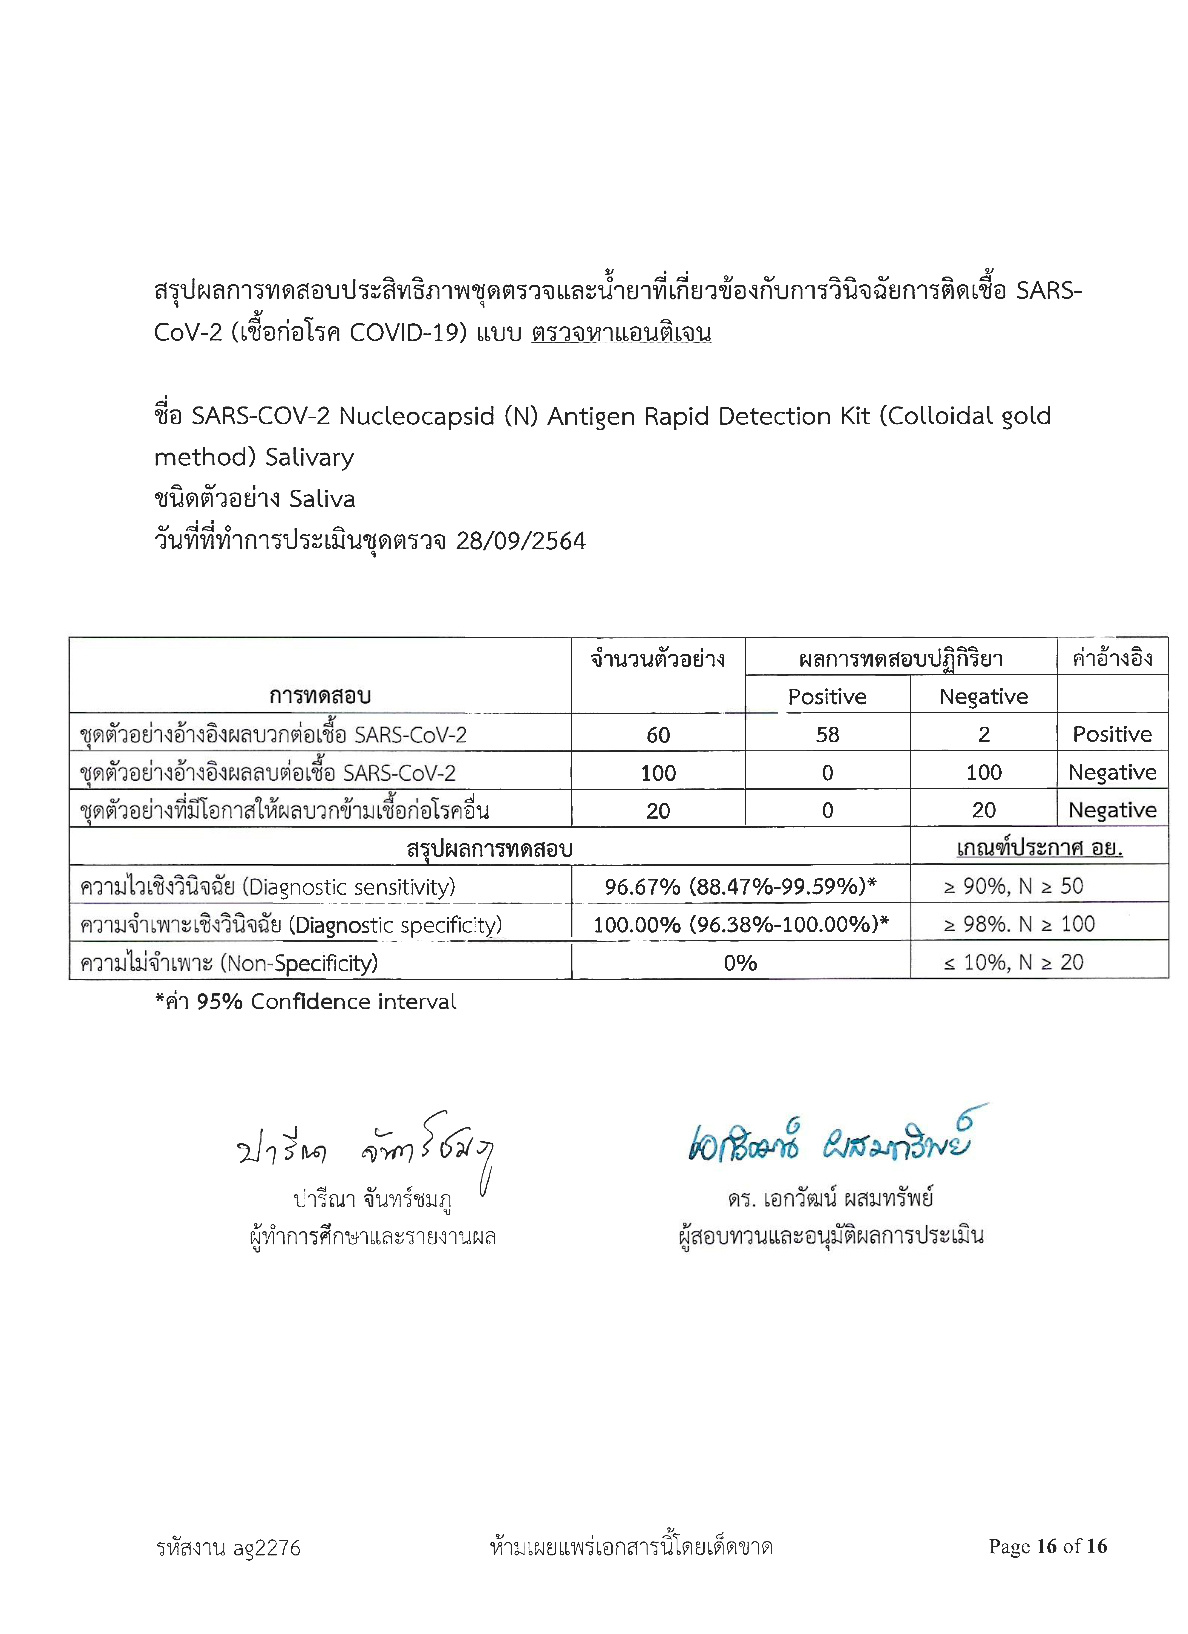 Nanjing  Synthgene  Medical COVID -19 Antigen detection kit passed the laboratory test of Mahidol University in Thailand